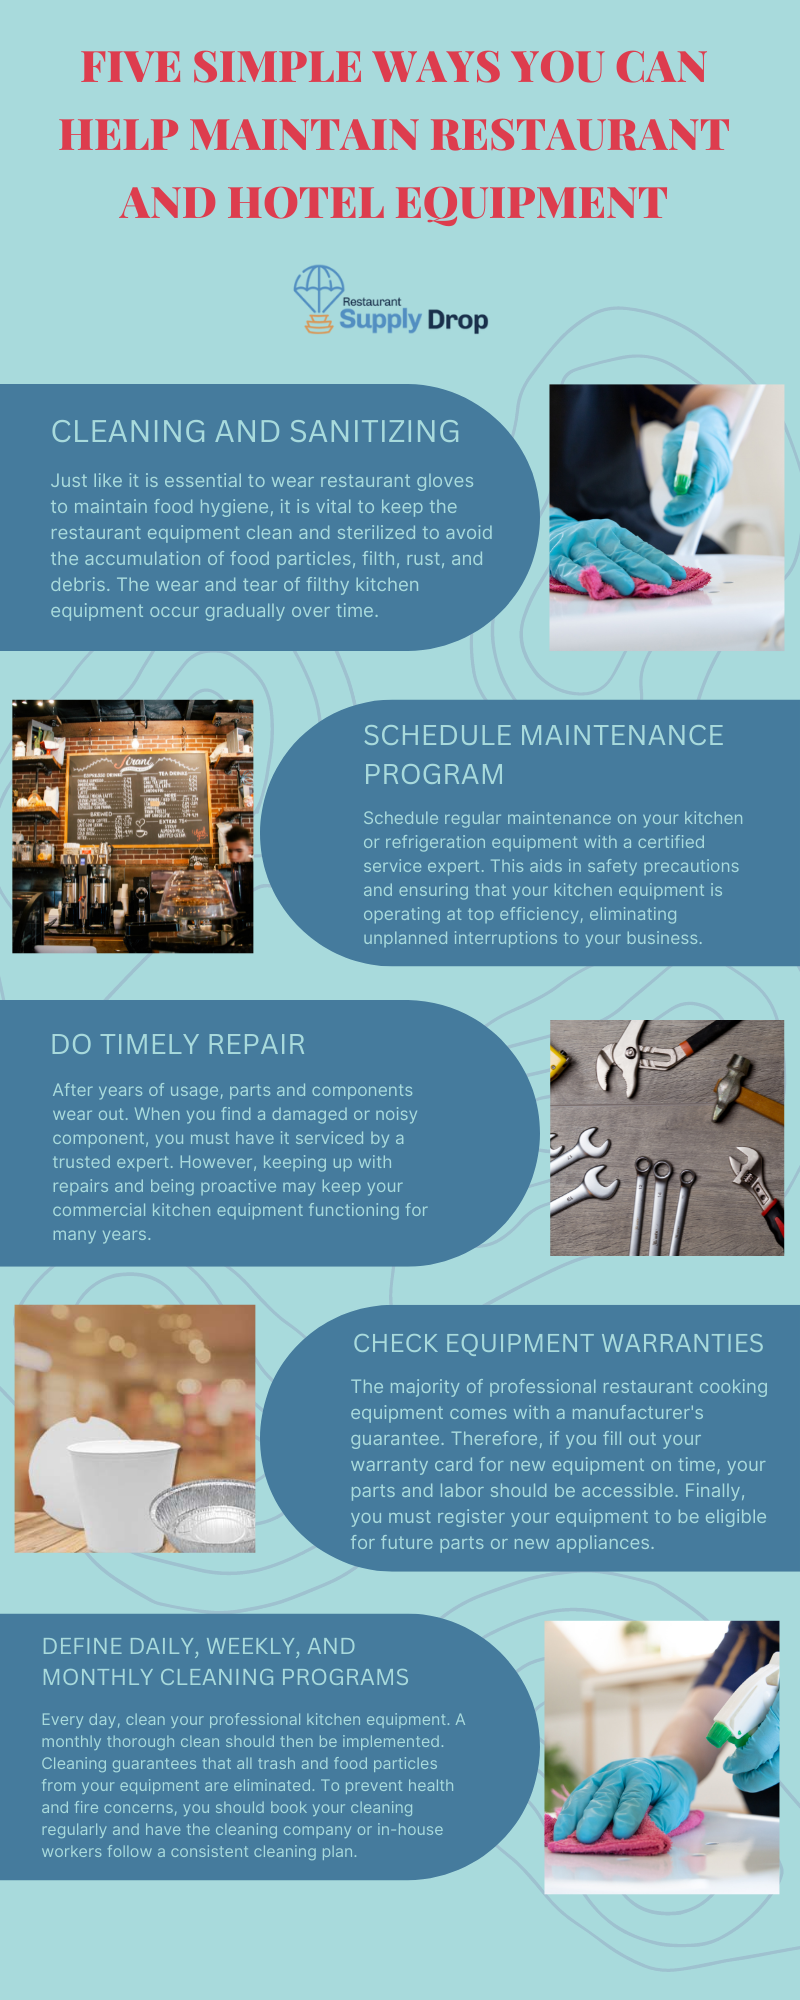 Five Simple Ways to Maintain Restaurant and Hotel Equipment